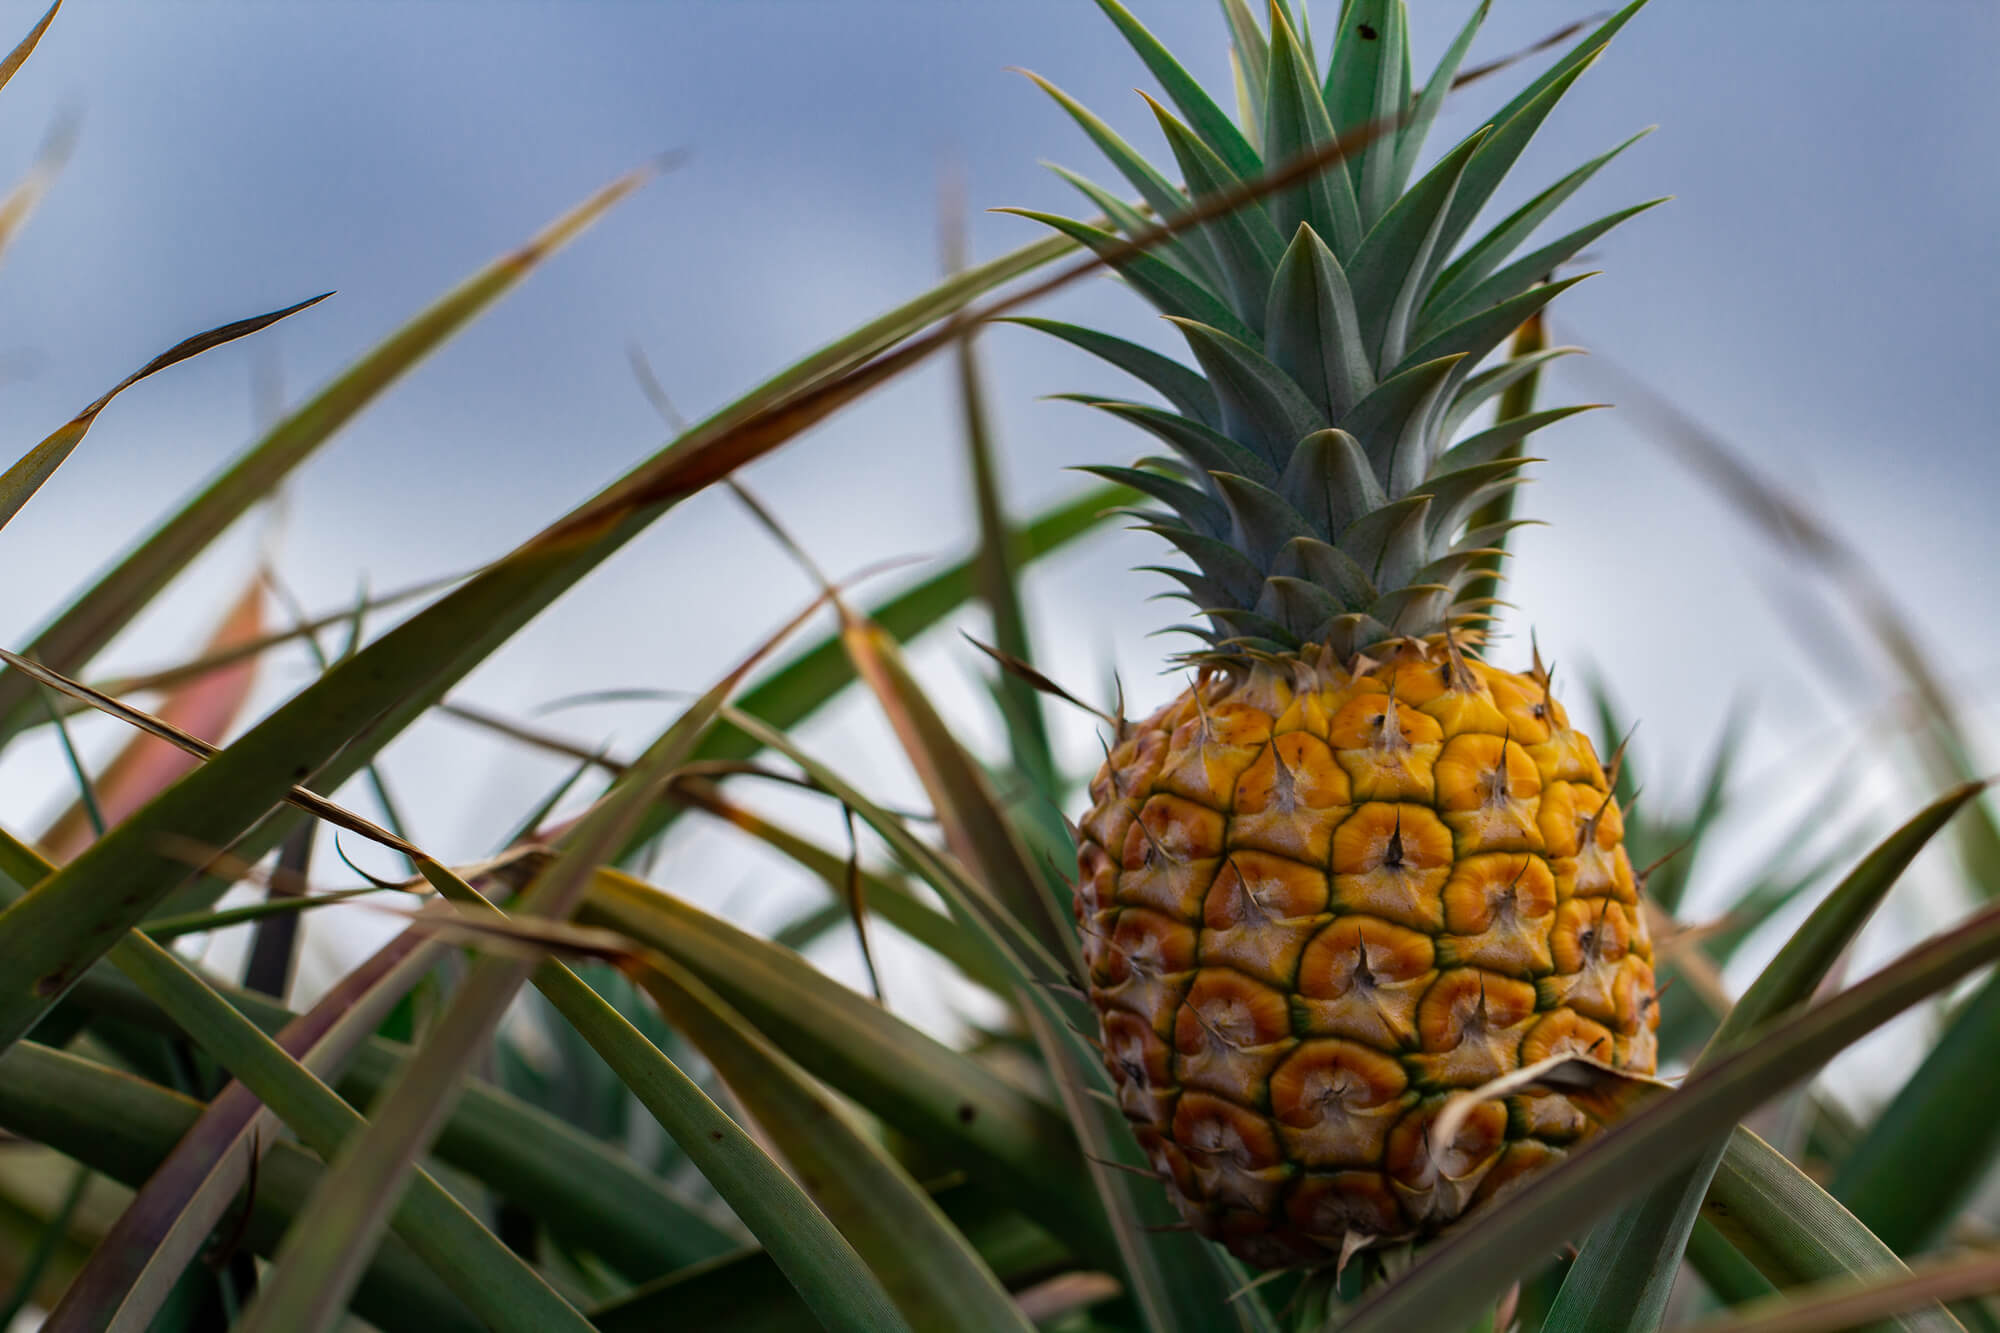 Learn how to visit a Hawaii pineapple farm by top Hawaii blog Hawaii Travel with Kids. Image of a pineapple growing in a field in Hawaii.